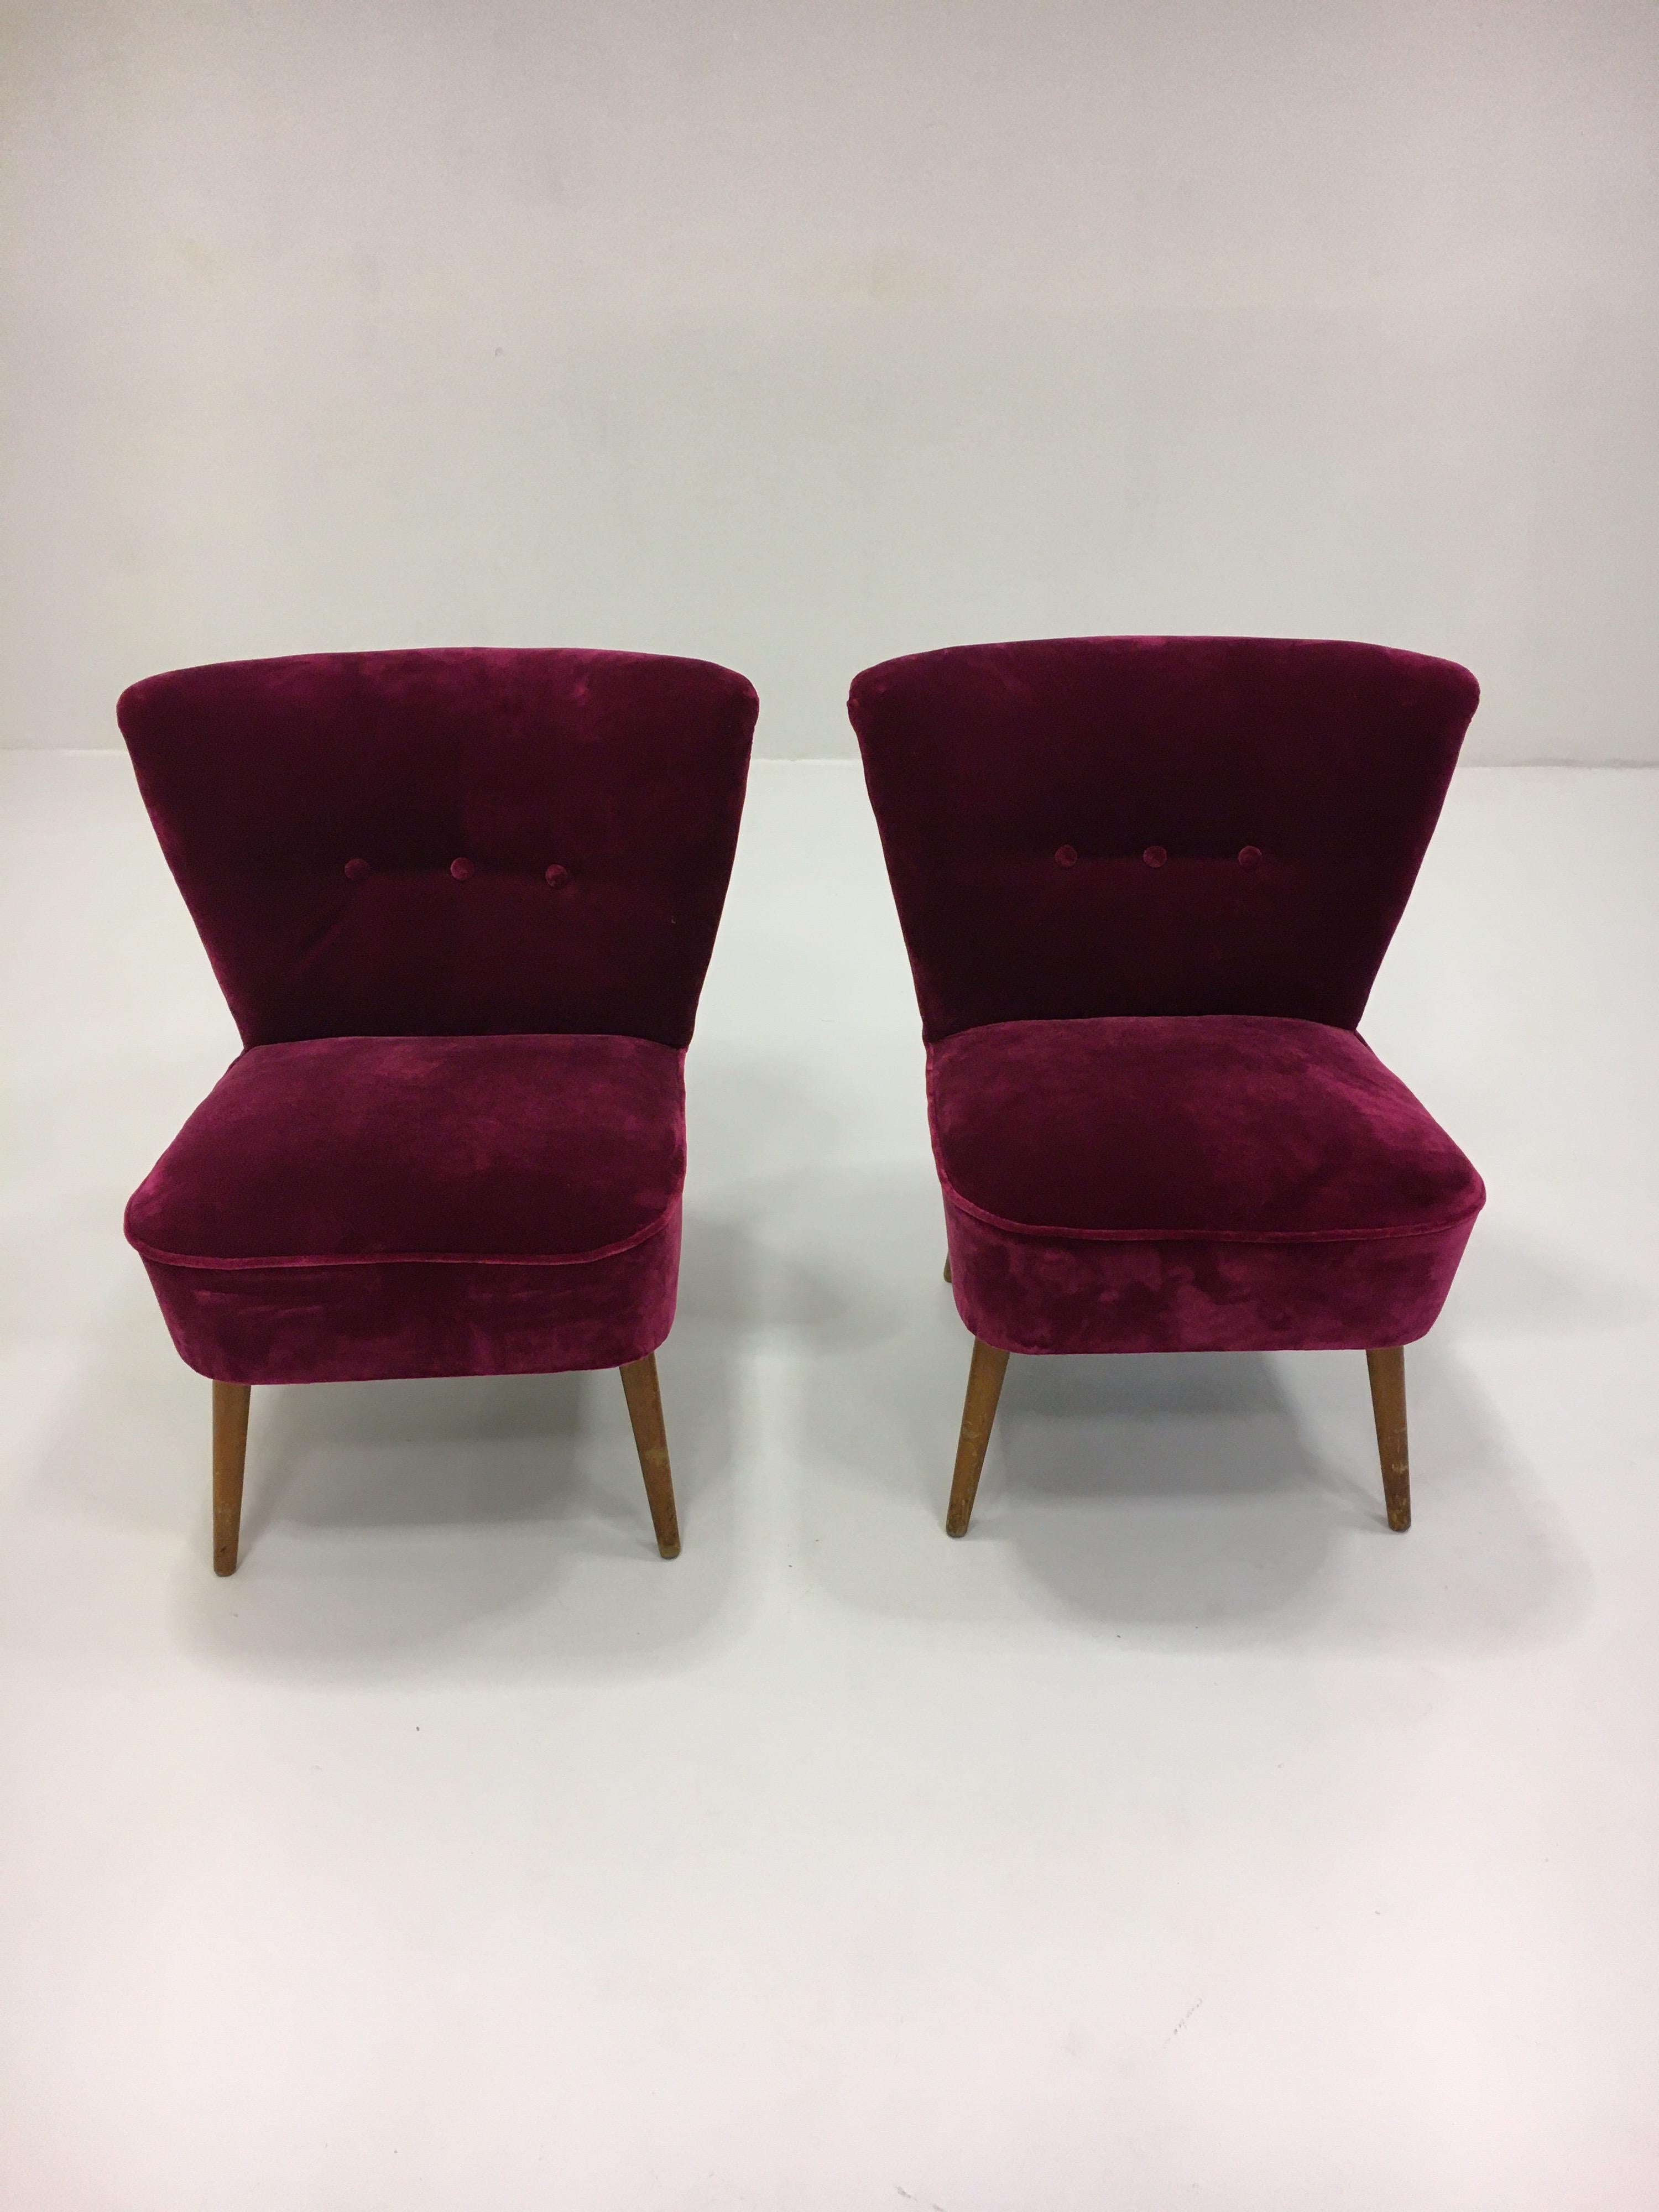 Mid-Century Modern Cocktail Chairs, France, 1950s For Sale 7